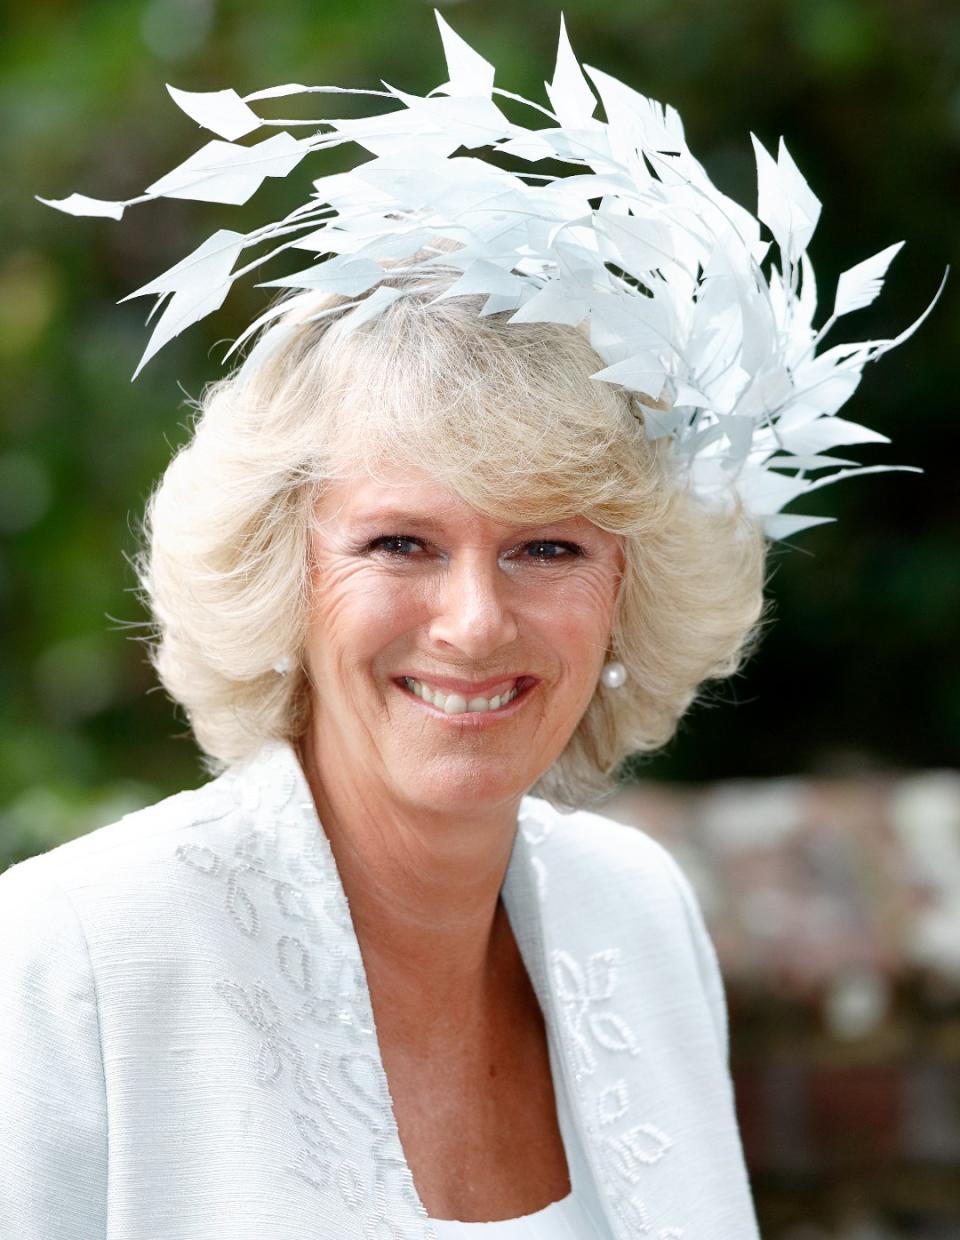 <p> At the wedding of her son, Tom Parker Bowles, Queen Camilla debuted a stunning white, feathered headpiece. The feathers are designed to look like they are in motion, arching over in a wave formation. </p>